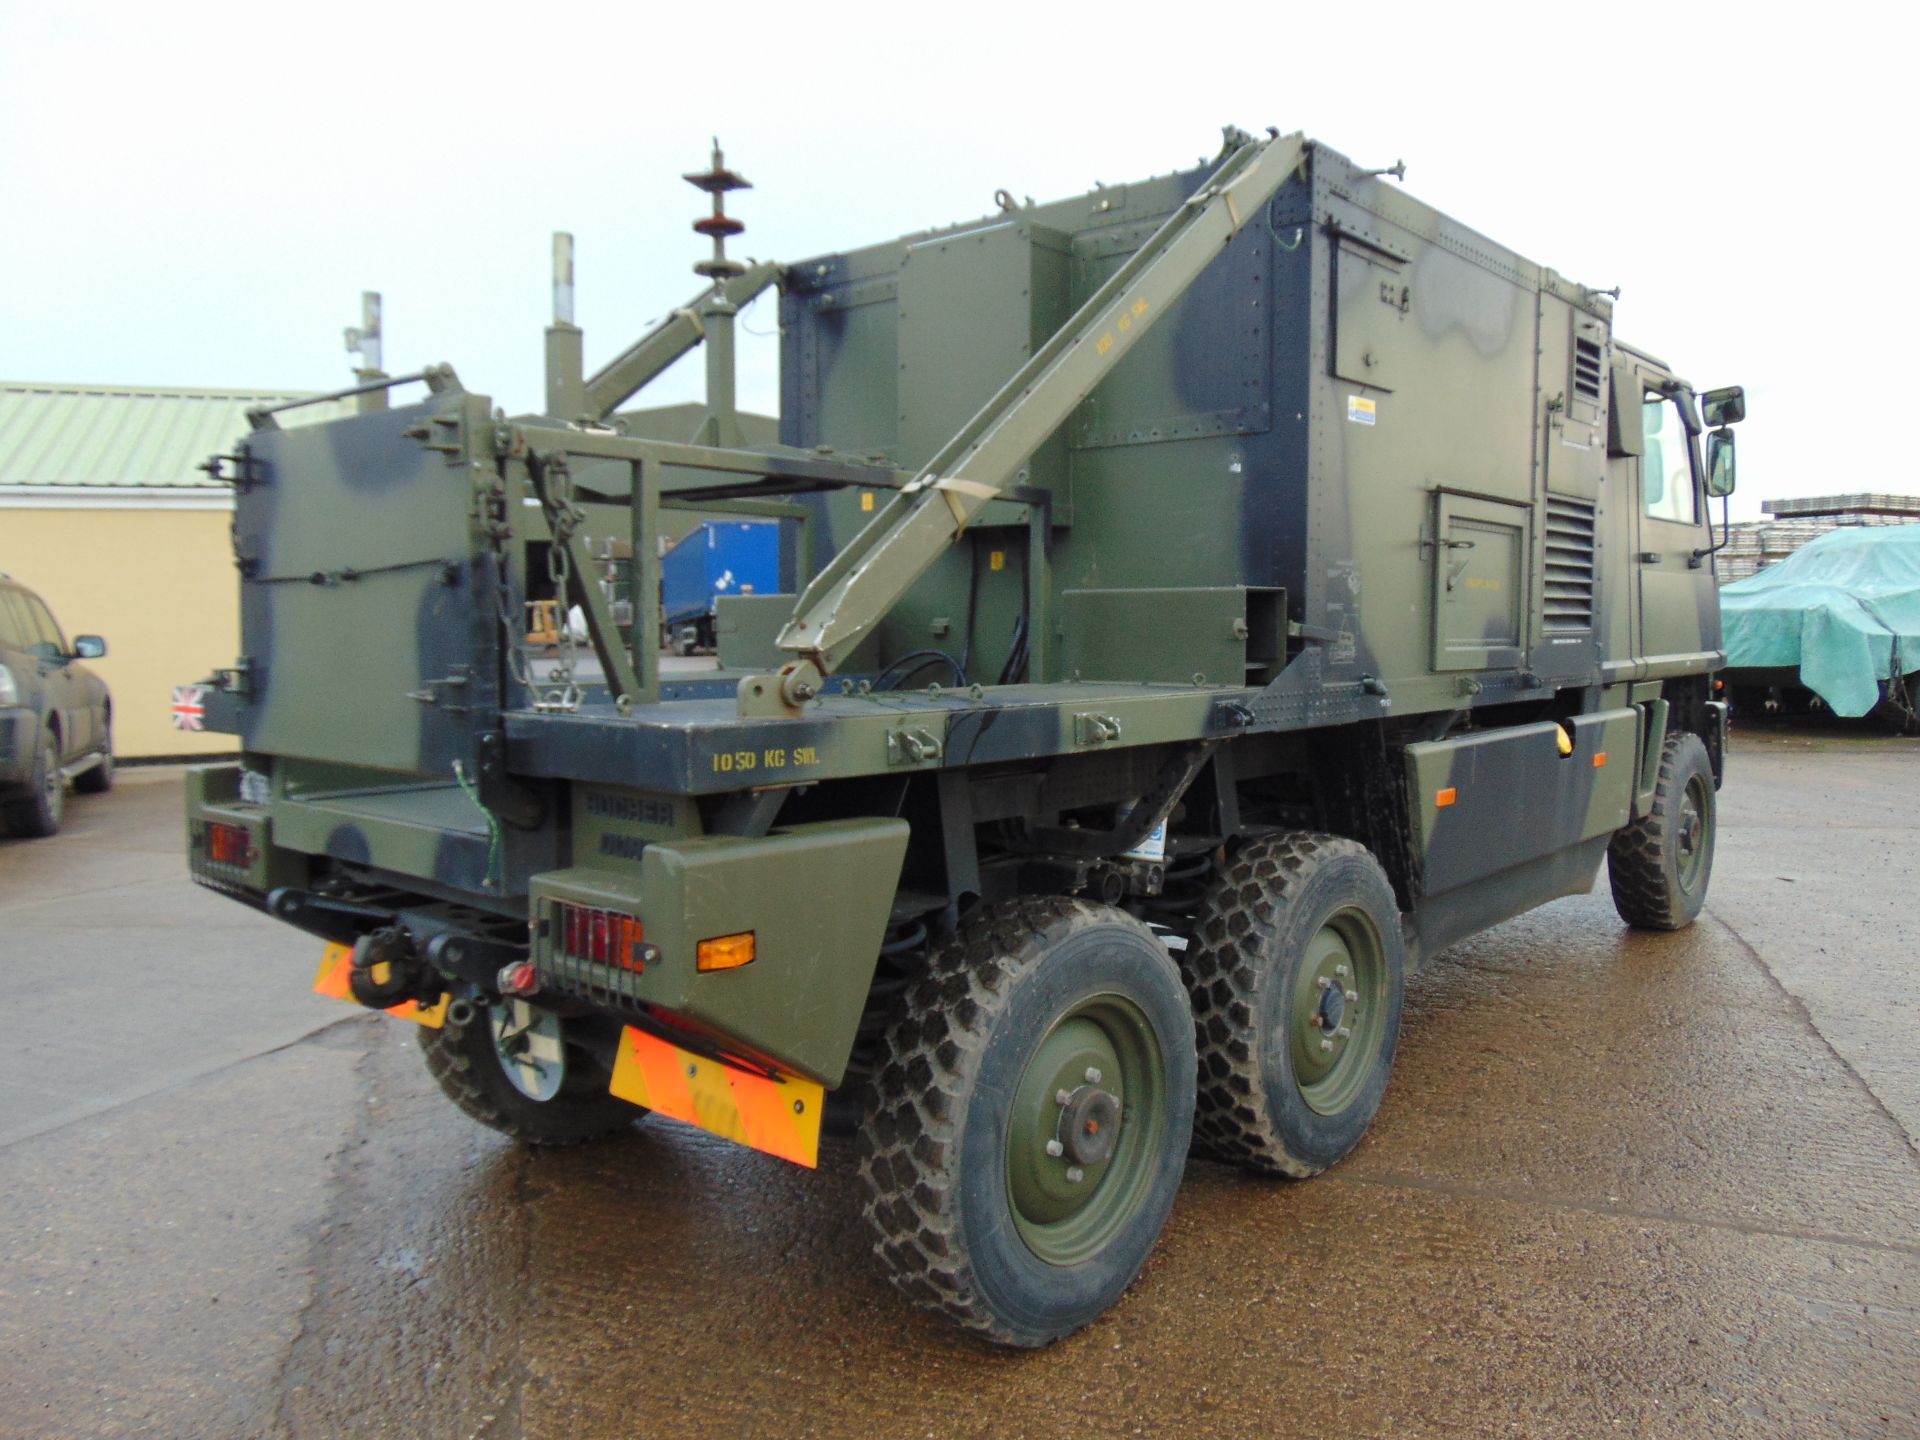 Ex Reserve Left Hand Drive Mowag Bucher Duro II 6x6 High-Mobility Tactical Vehicle - Image 8 of 16